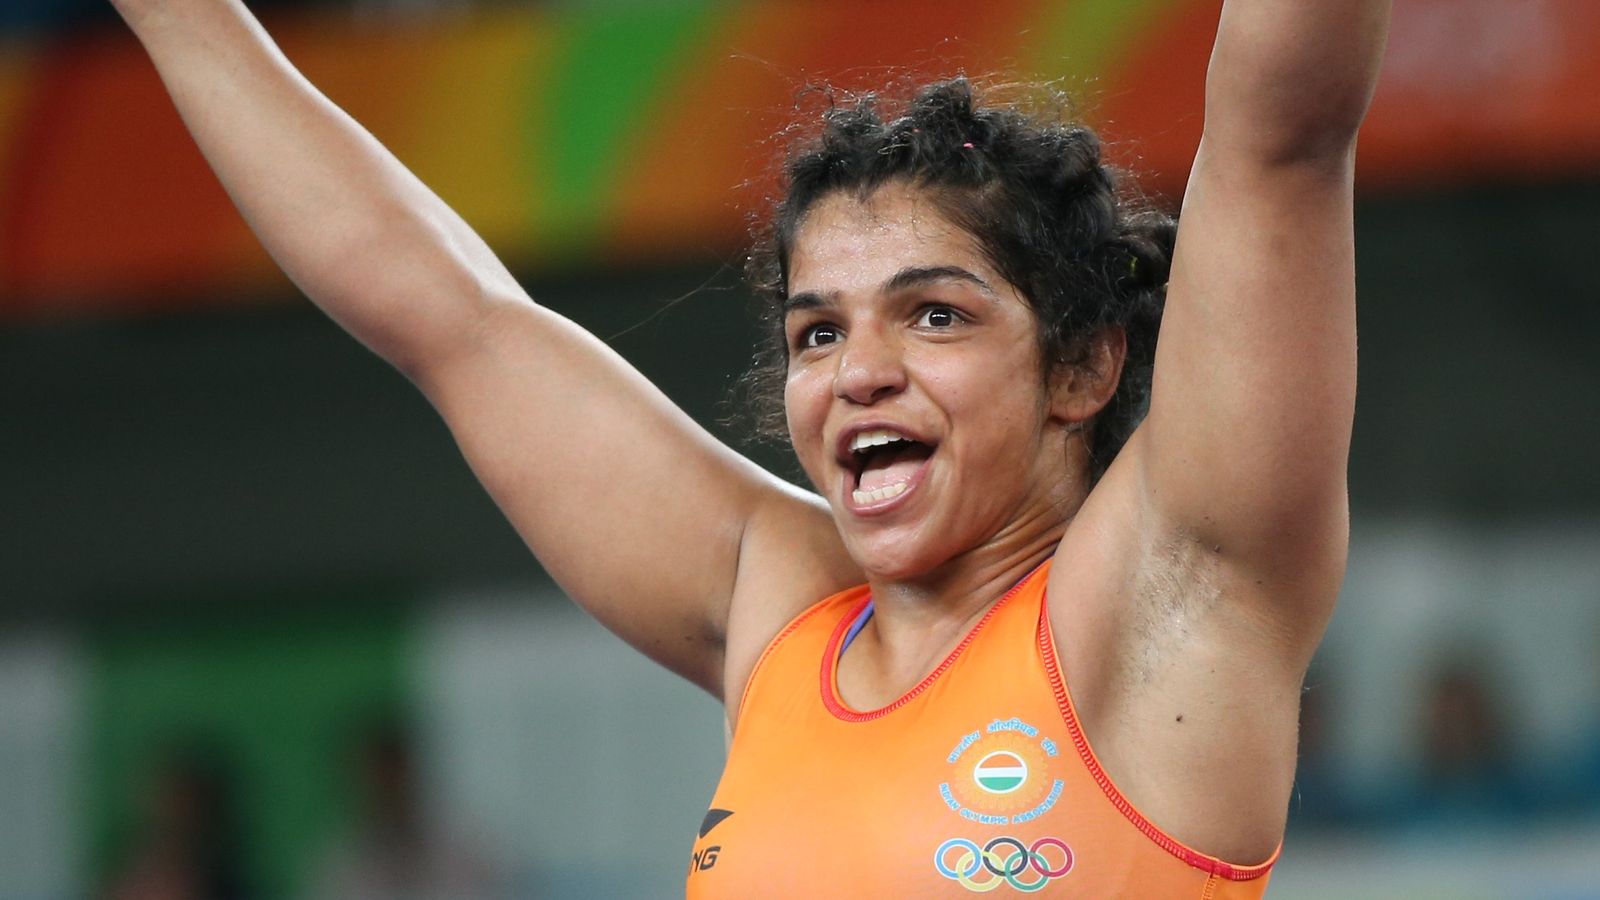 Olympic wrestlers who 'broke barricades' at sexual harassment protest detained in India